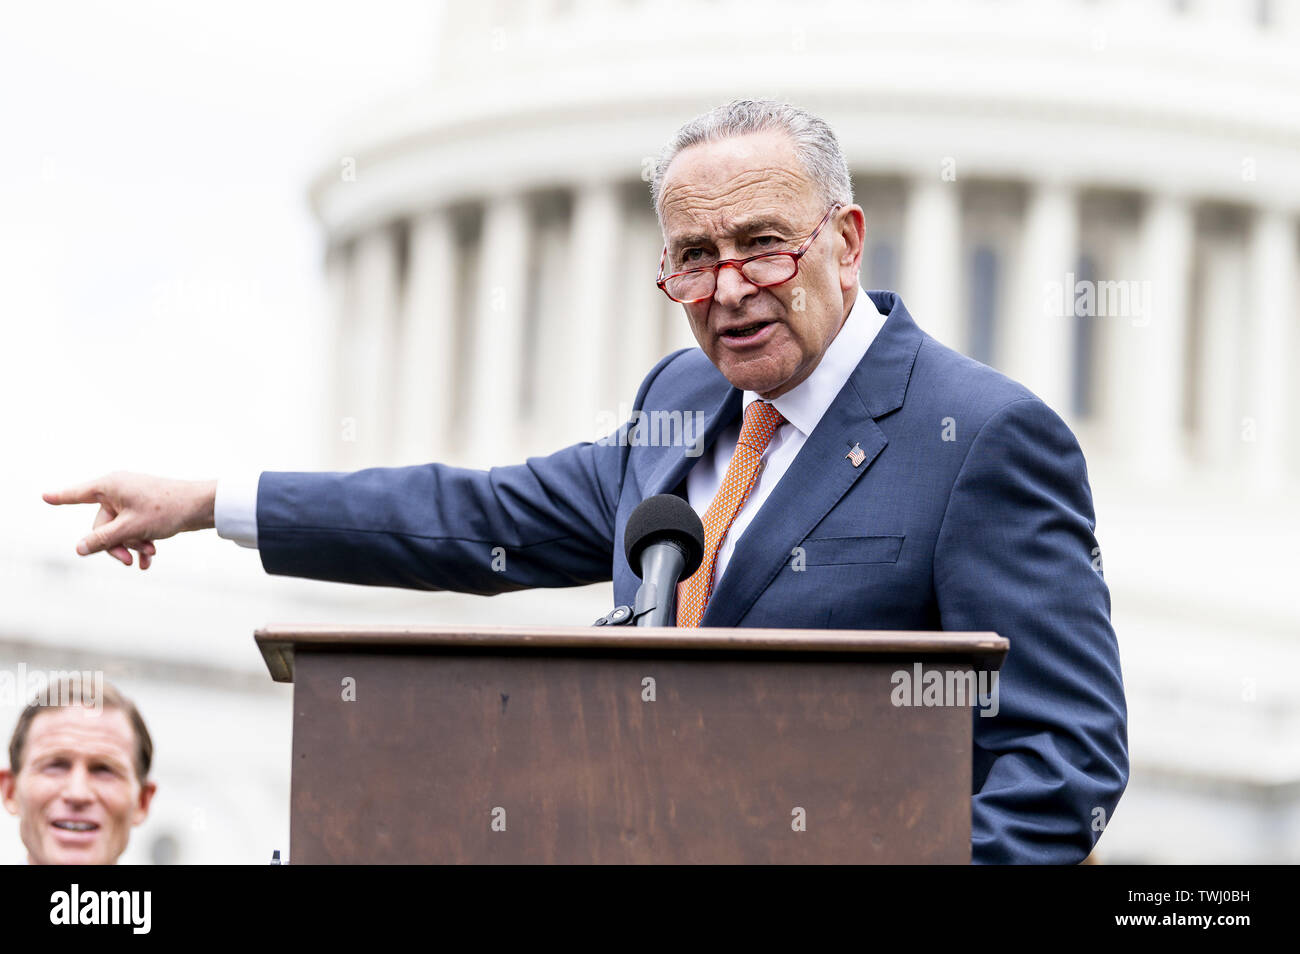 Washington, D.C, USA. 20th June, 2019. Senate Minority Leader CHUCK SCHUMER (D-NY) speaking at an event in front of the Capitol to urge the passage of H.R. 8 universal (gun ownership) background checks legislation. Event held on the grass on the eastern side of the U.S. Capitol in Washington, DC on June 20, 2019. Credit: Michael Brochstein/ZUMA Wire/Alamy Live News Stock Photo